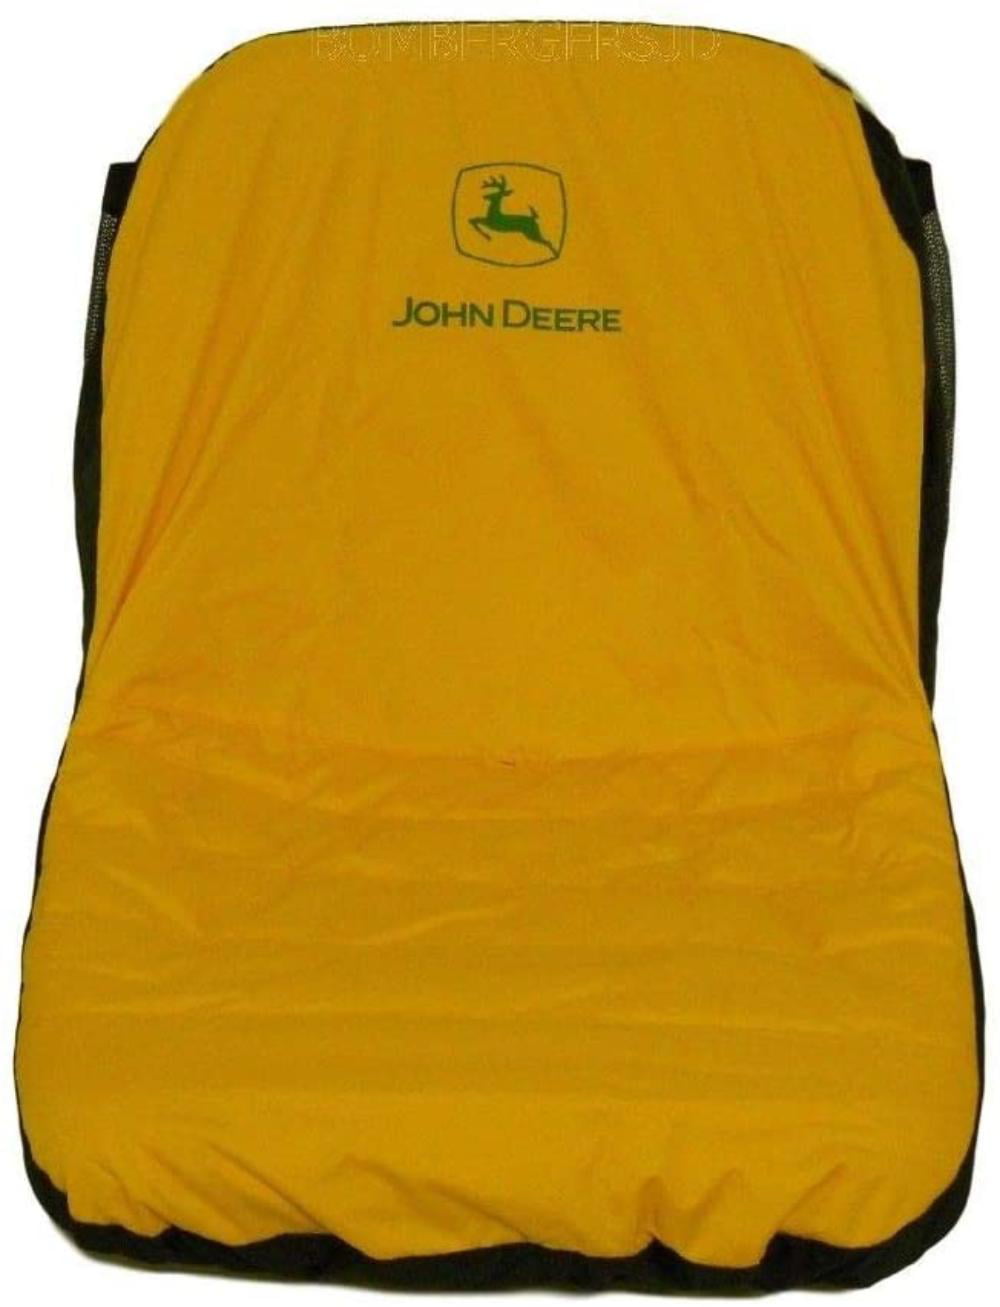 JOHN DEERE LARGE SEAT COVER FOR SEATS WITH 18in BACK REST LAWN TRACTORS LP92334 